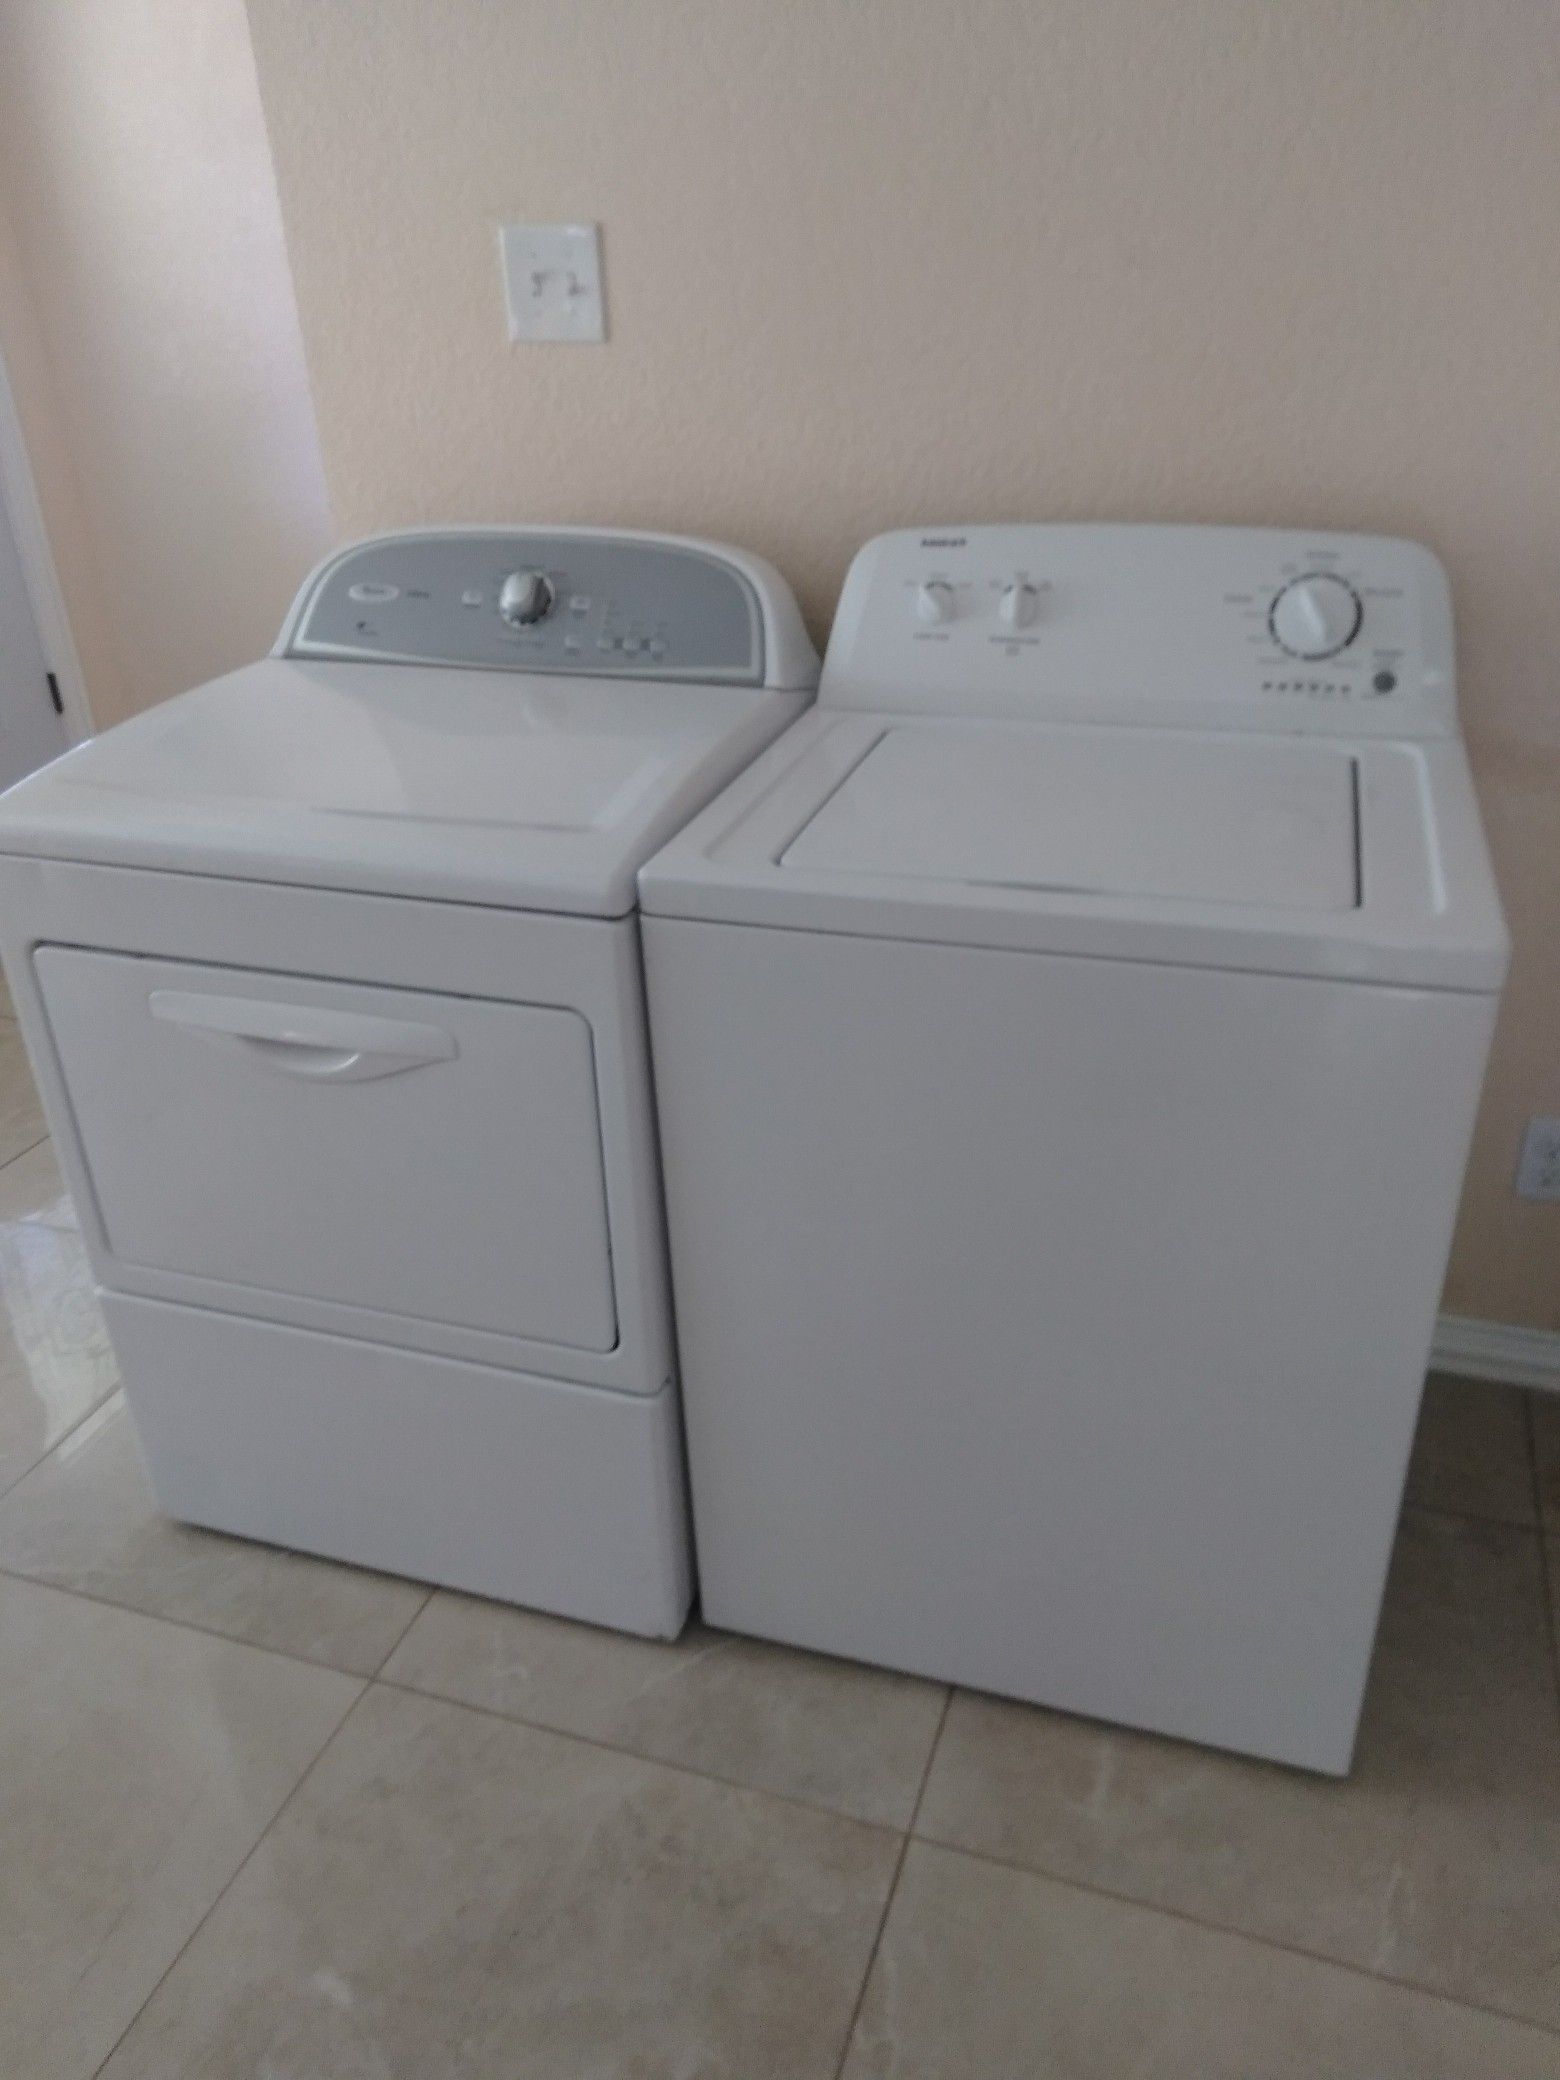 ROPER WASHER AND WHIRLPOOL ELECTRIC DRYER ////////////////////////////////// LAVADORA ROPER Y SECADORA ELÉCTRICA WHIRLPOOL